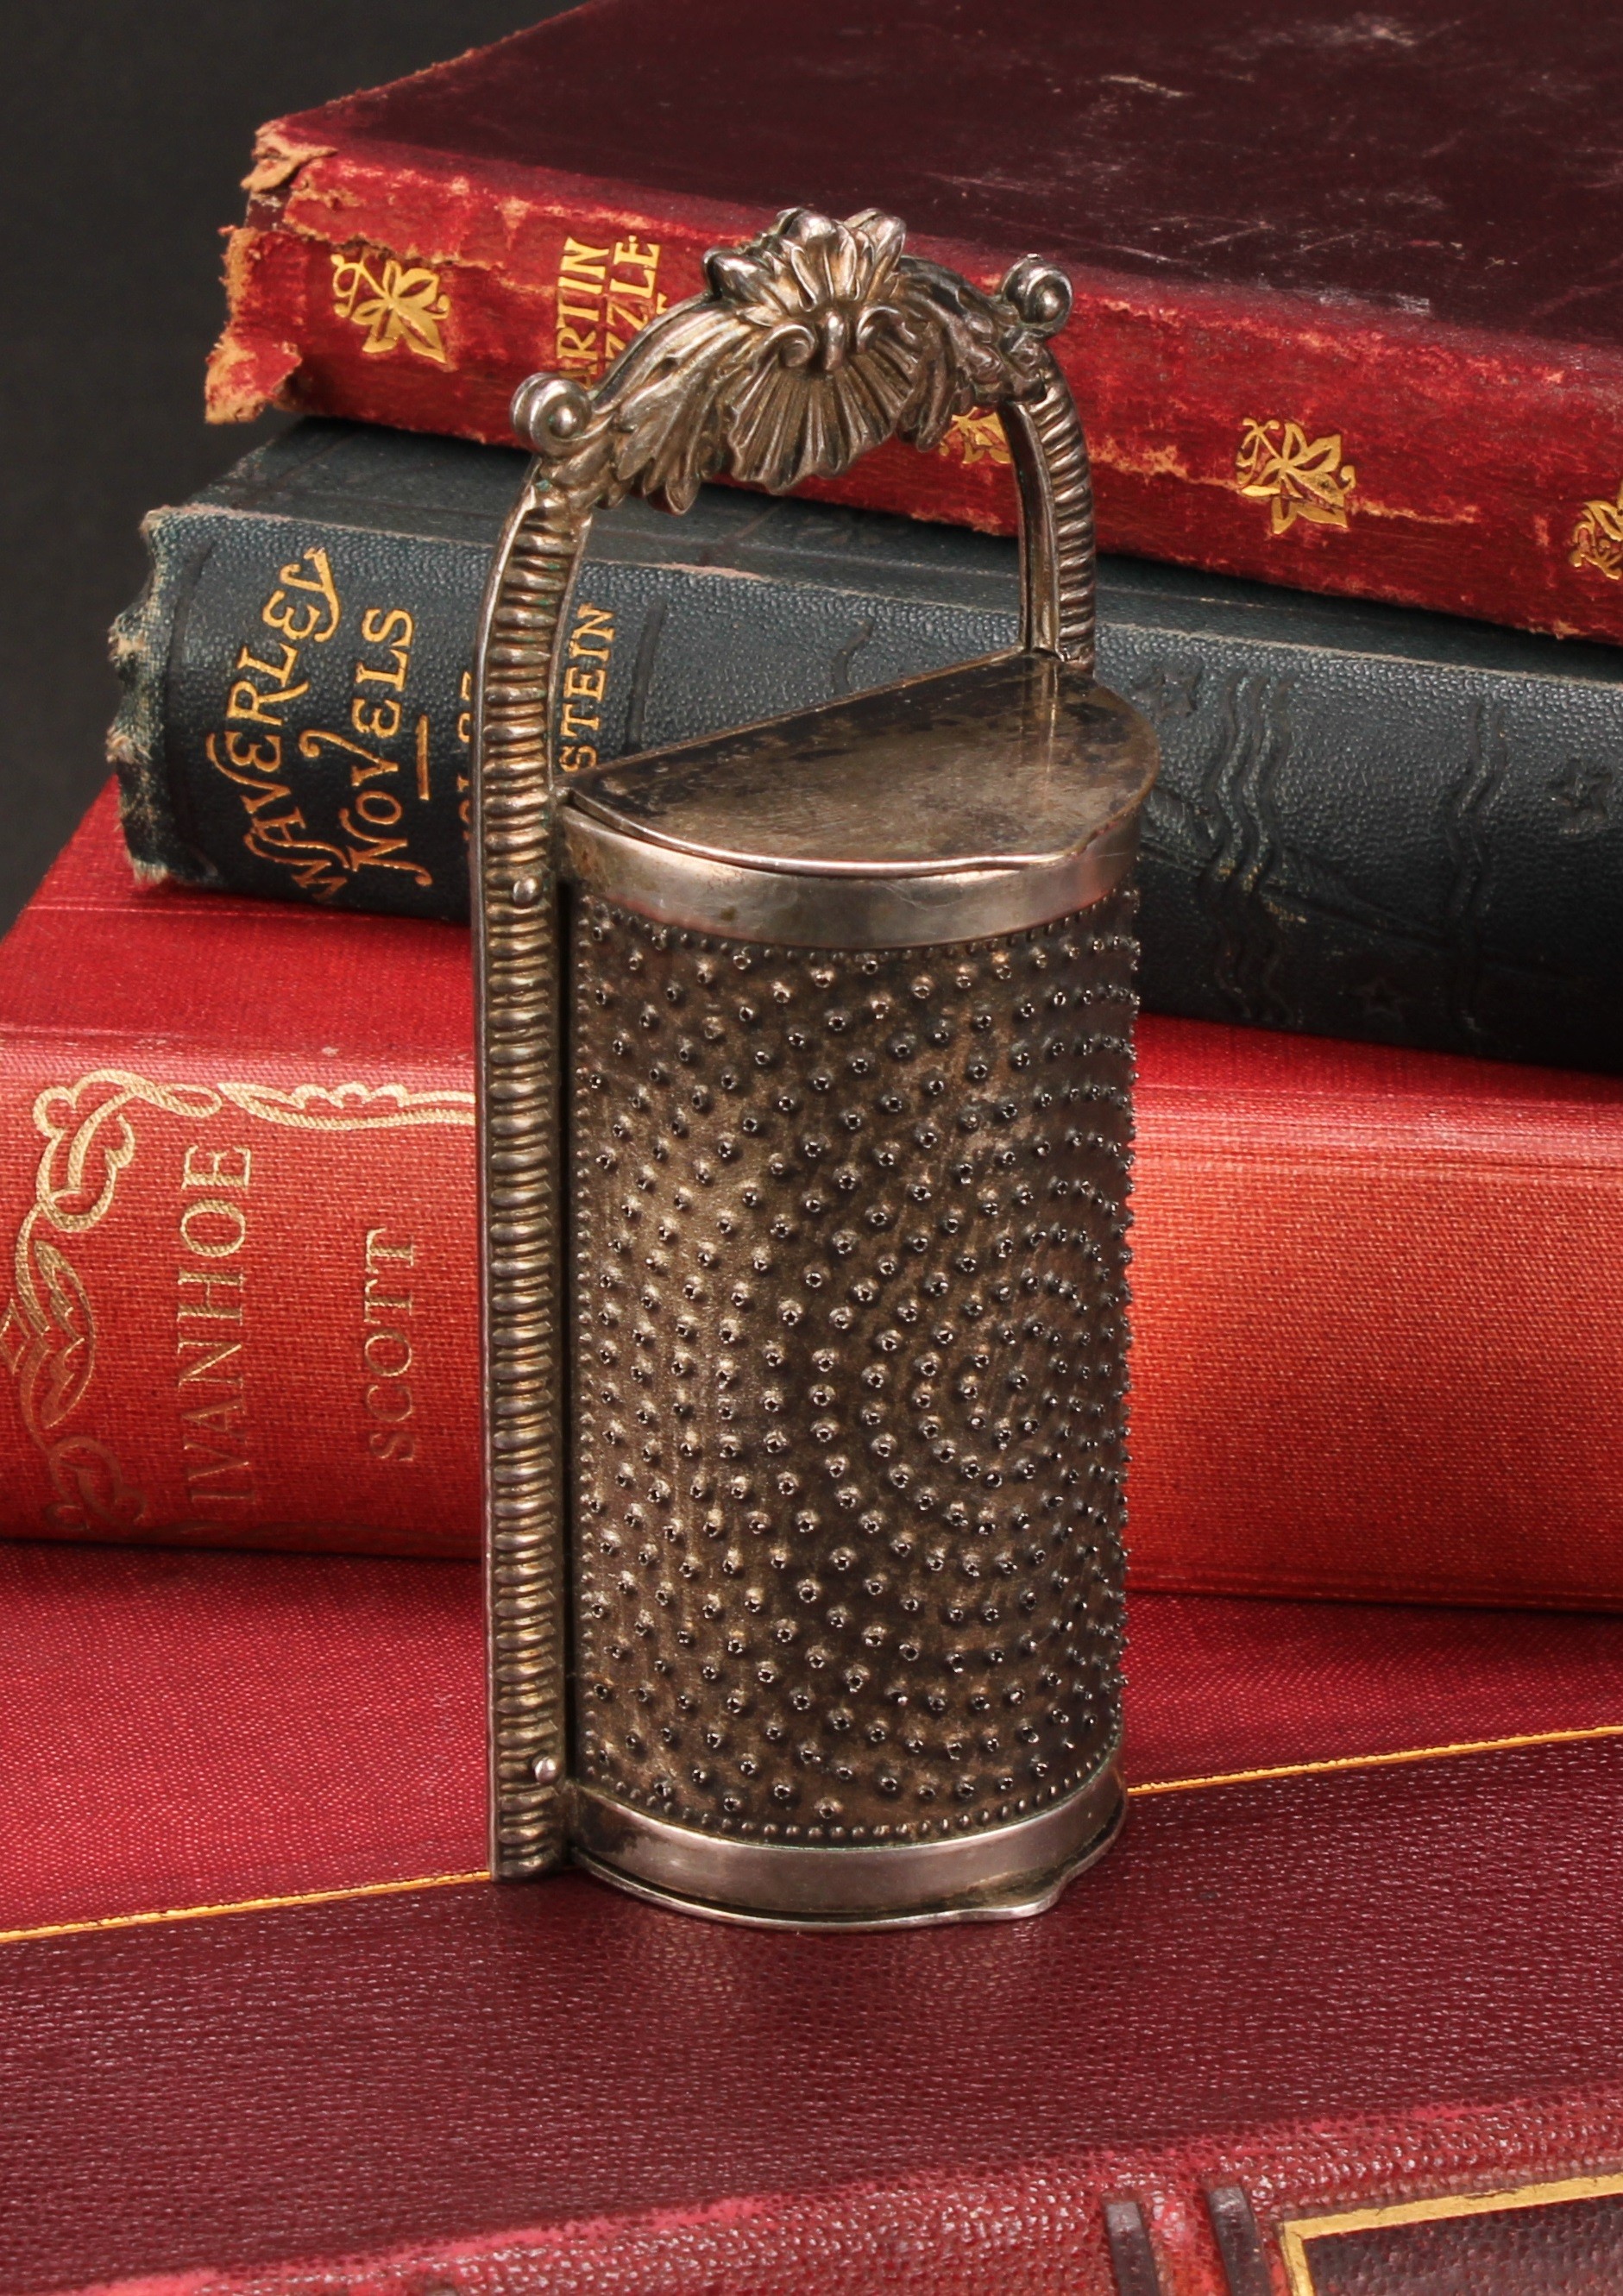 A George III style plated nutmeg grater, Dubarry Pro Patent, Rd. 765097, 10.5cm high, 20th century